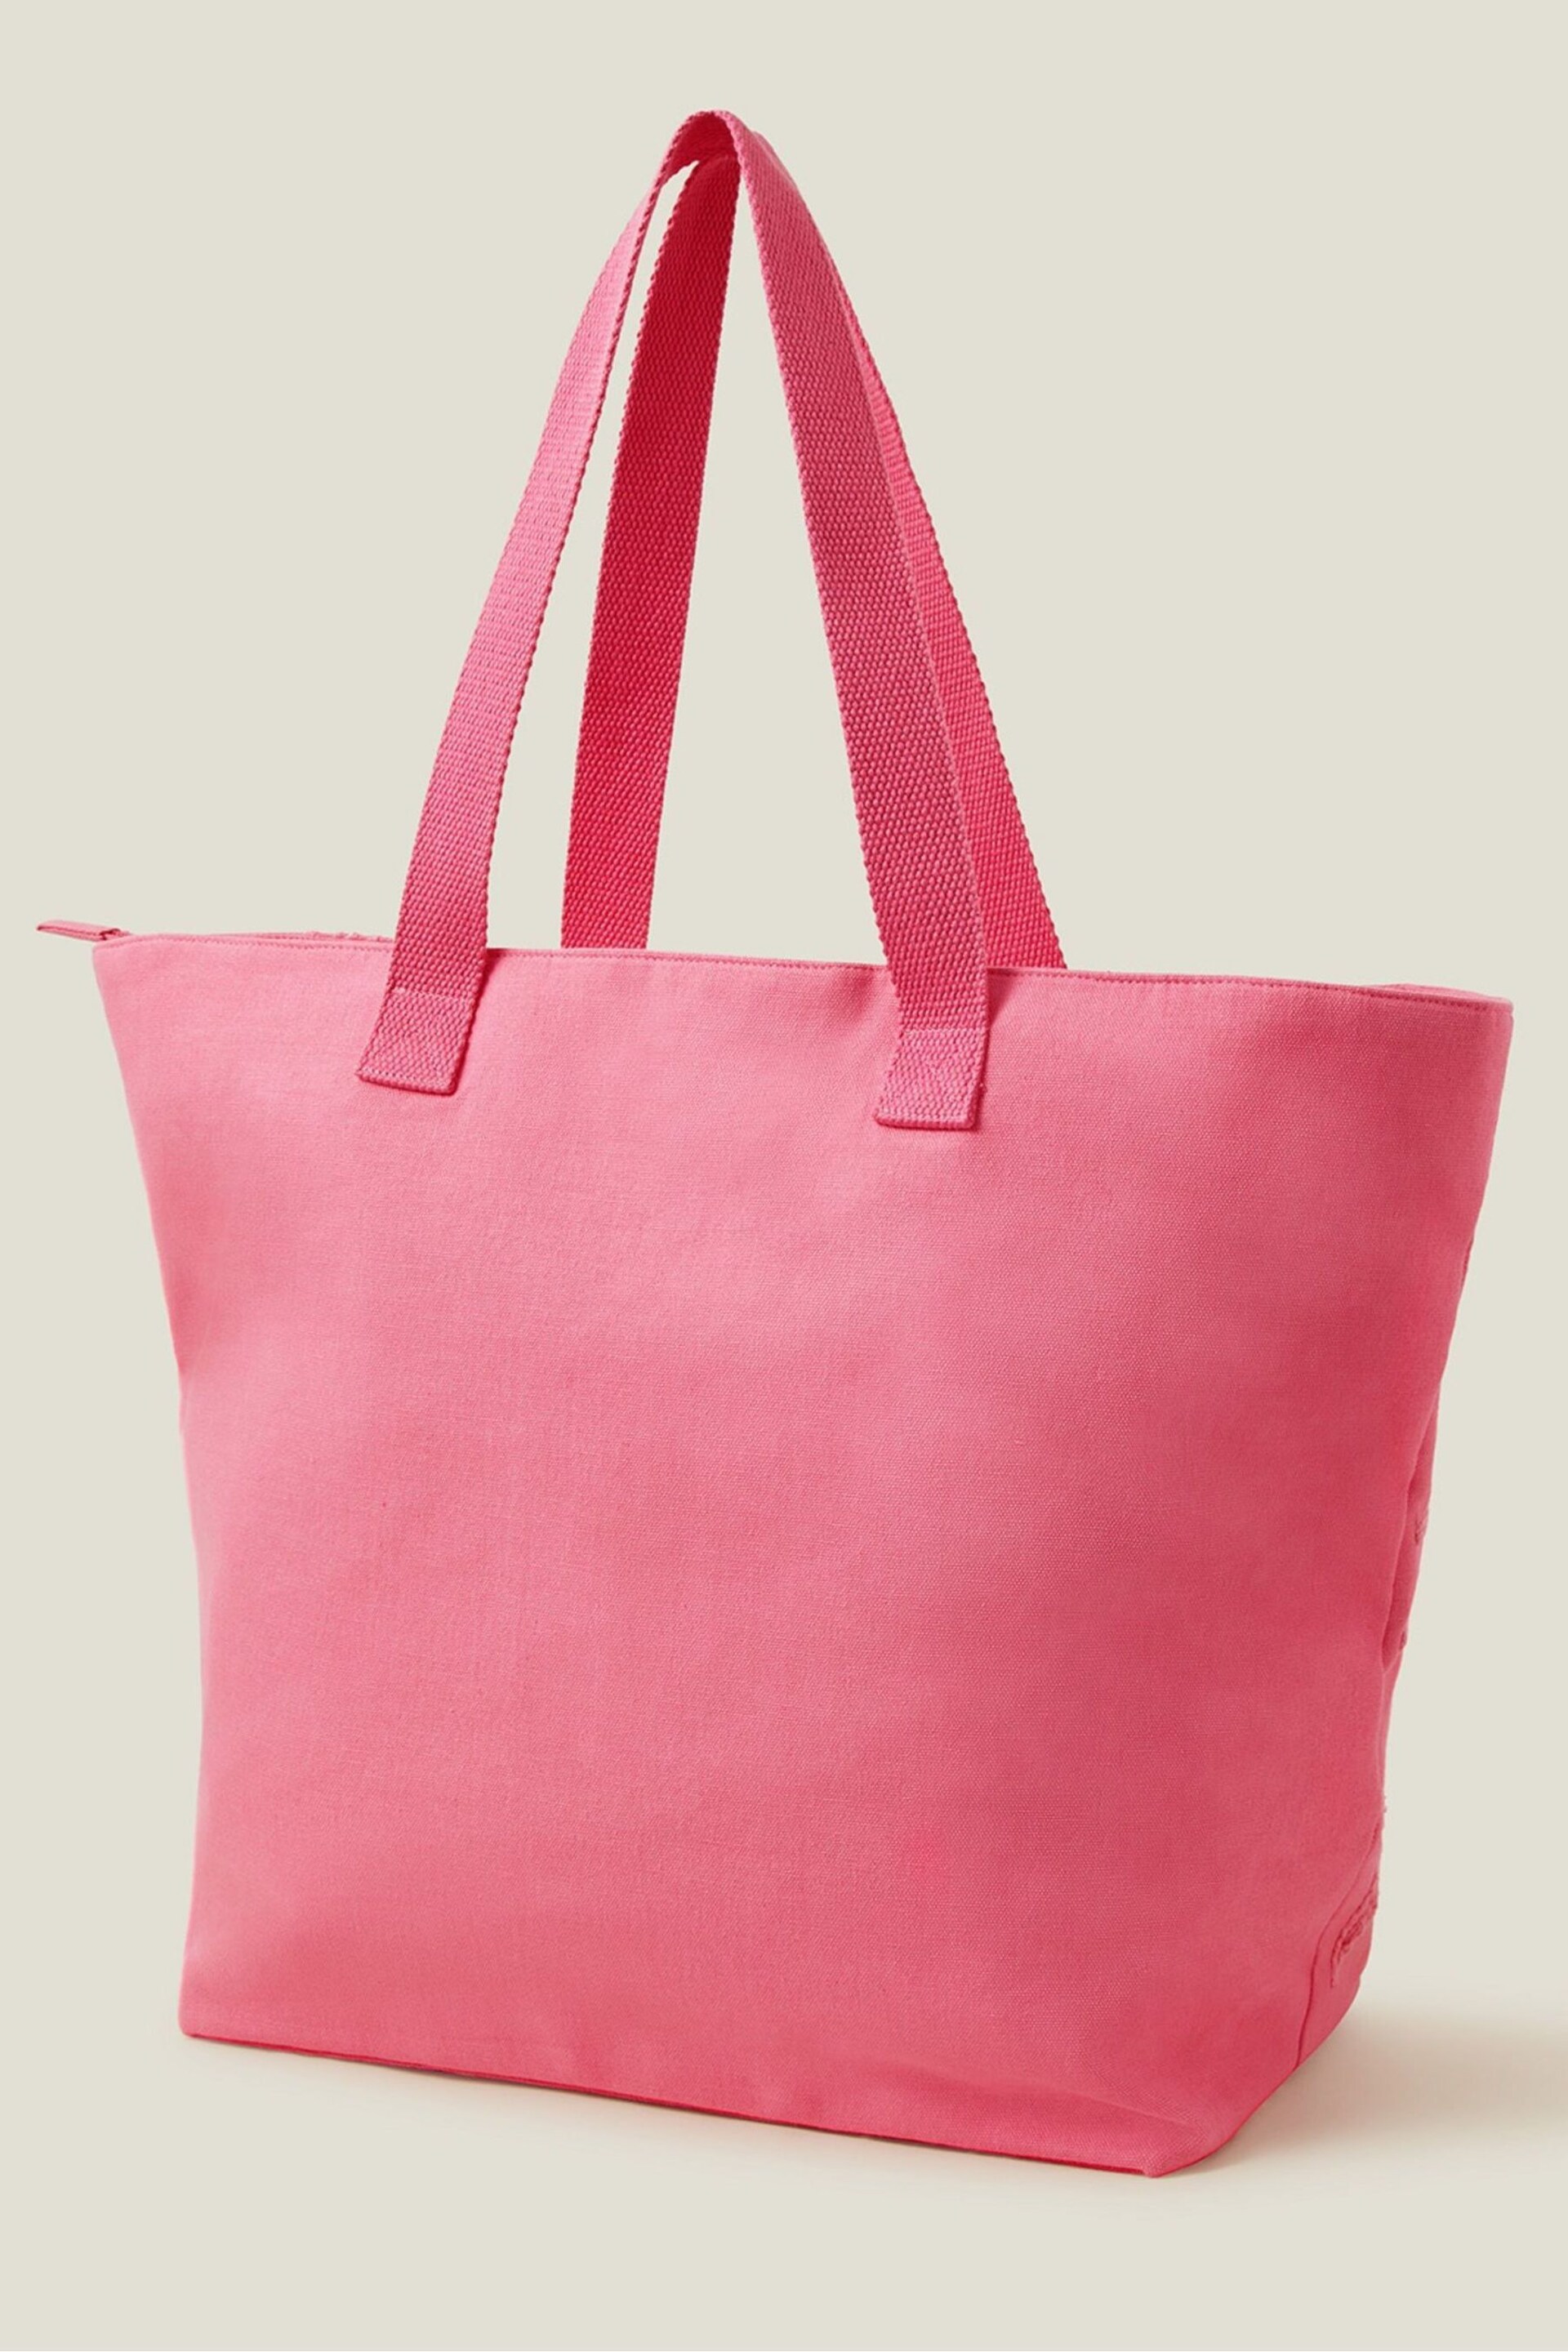 Accessorize Pink Embroidered Shopper Bag - Image 2 of 4